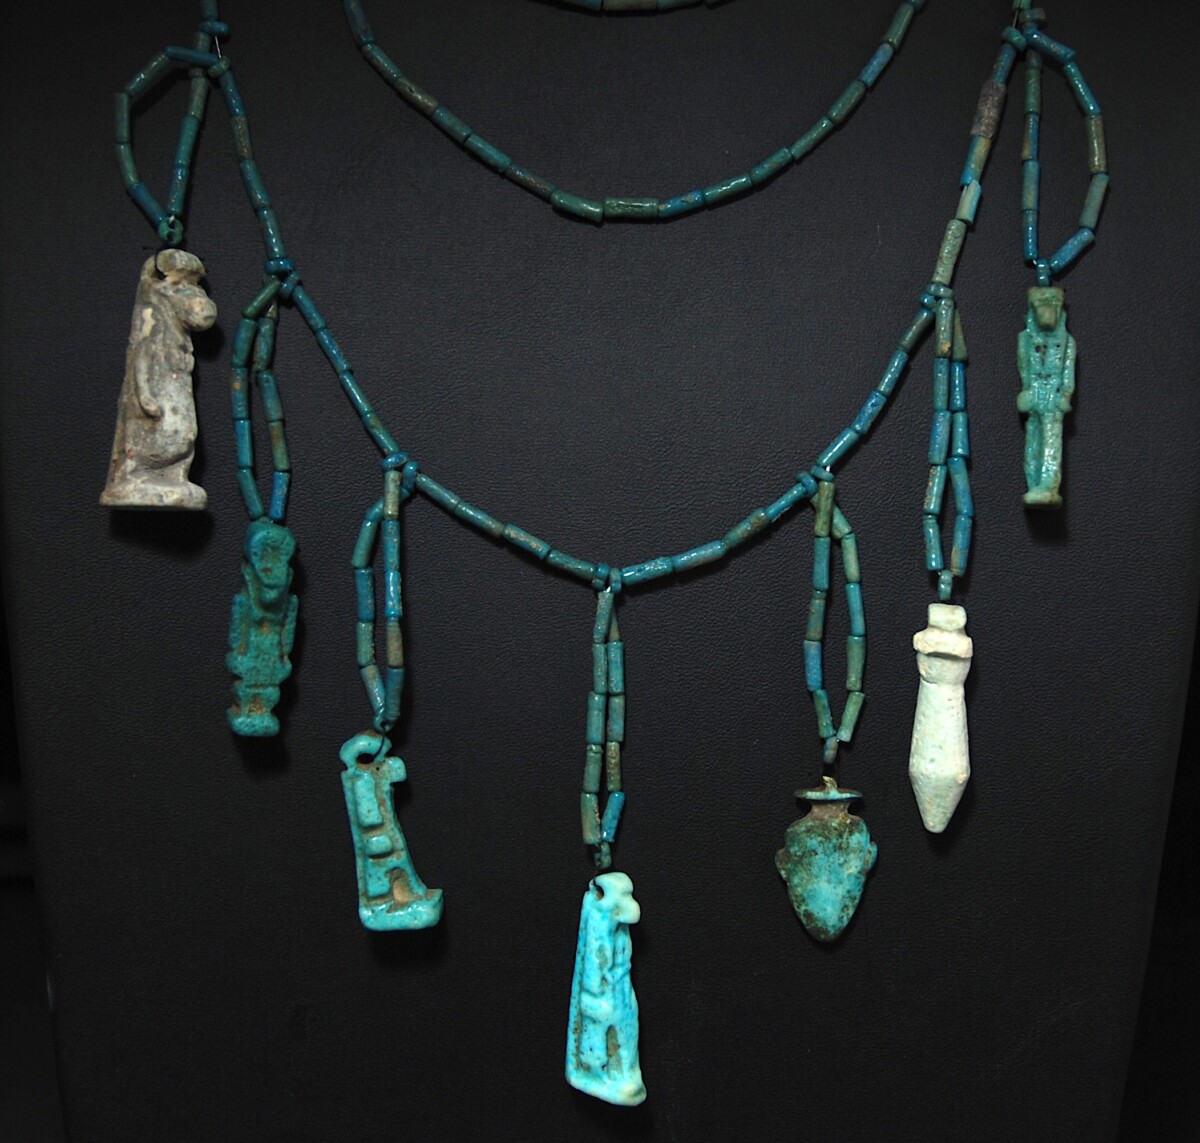 Egyptian Fayence necklace with seven amulets detail